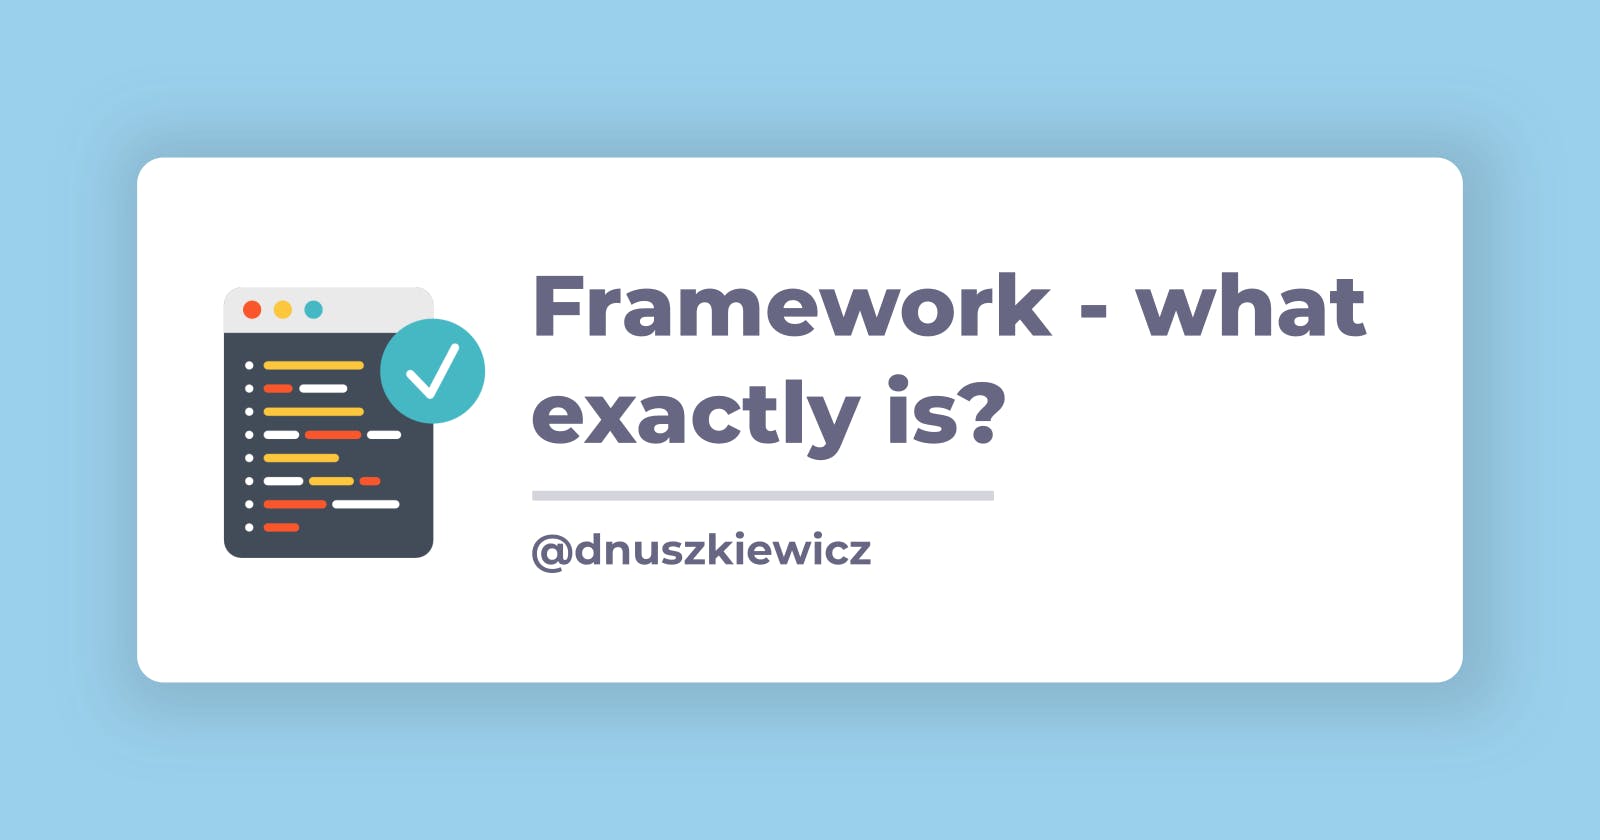 Framework - what exactly is?